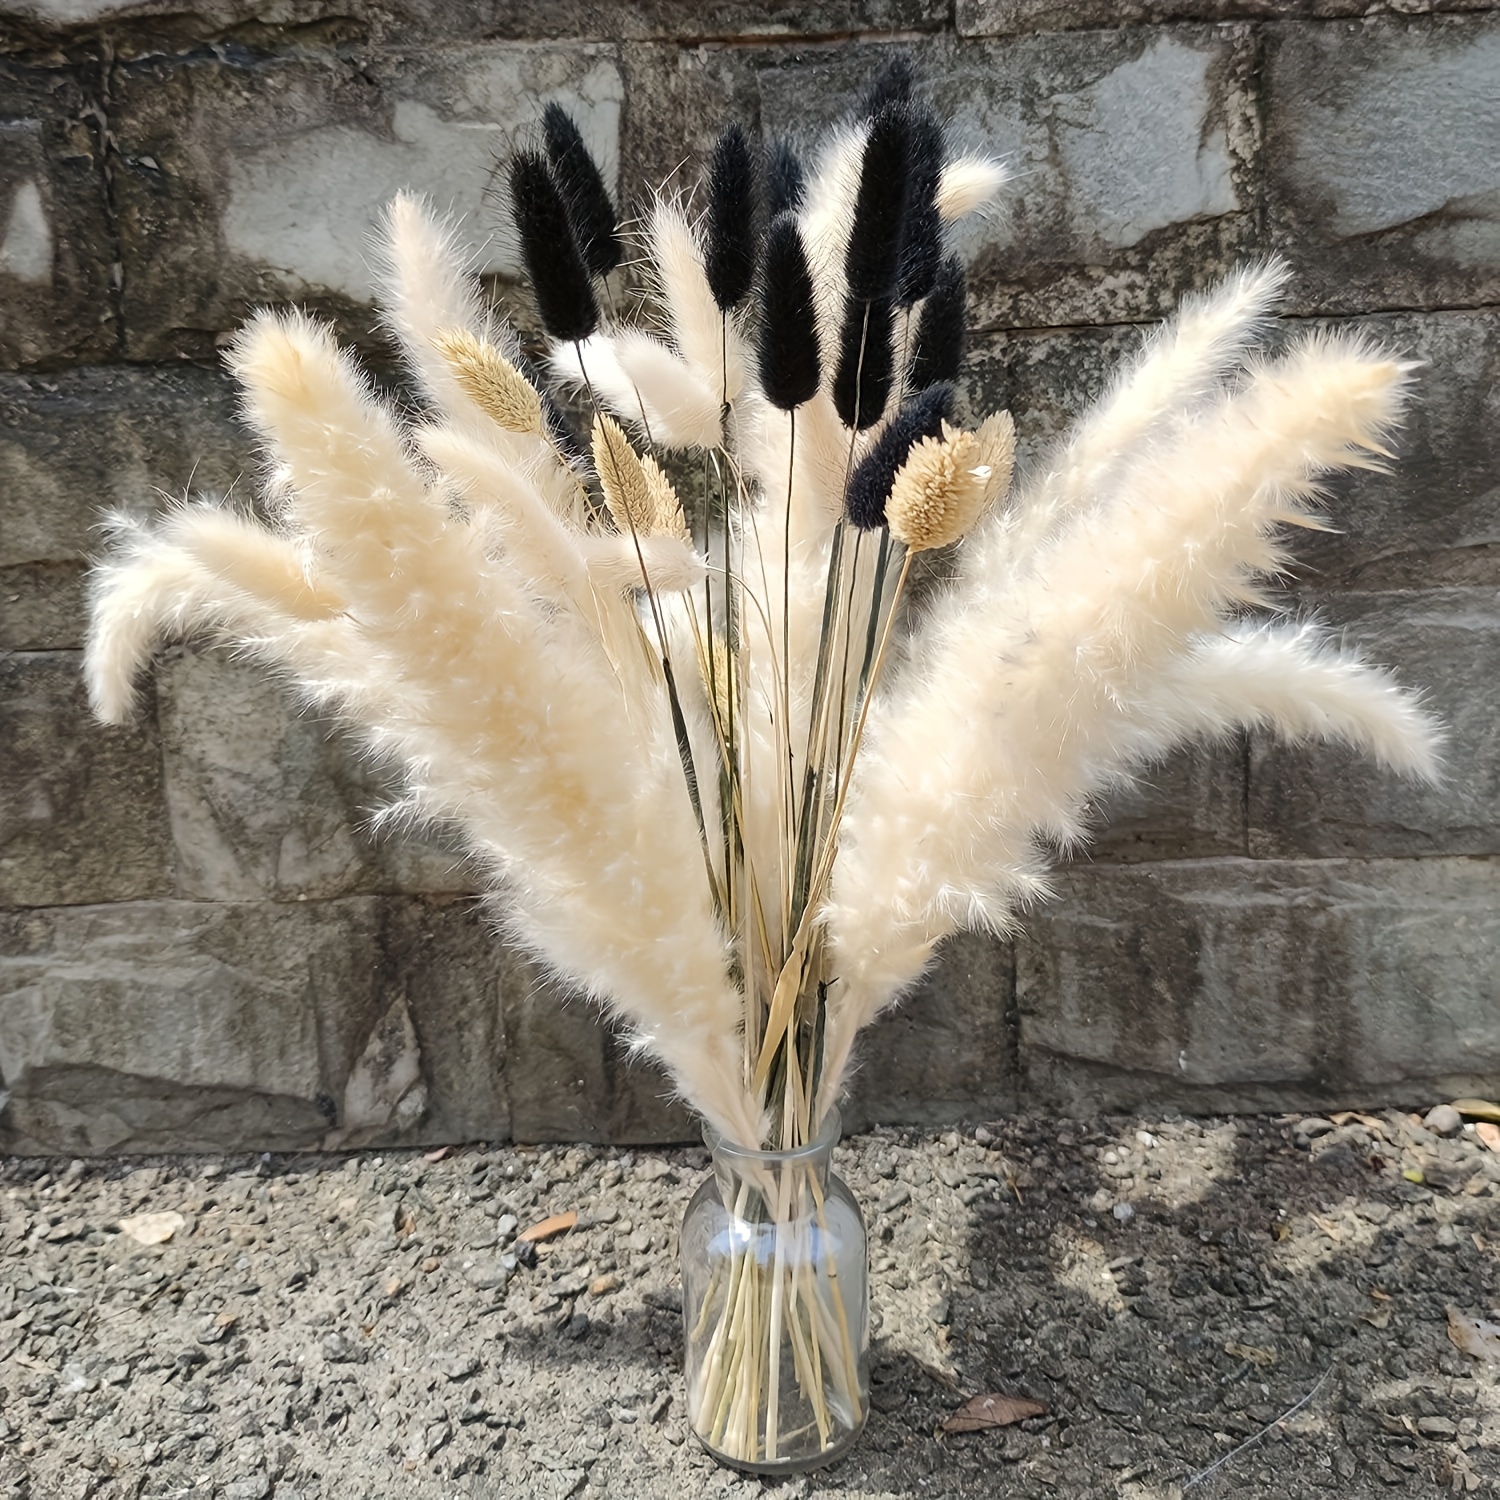 

40pcs Pampas Grass Stems Black White Bunny Tail Dried Flowers Boho Style Bouquet Tall Reed Grass Plume Wedding, Valentine's Day Easter Gift